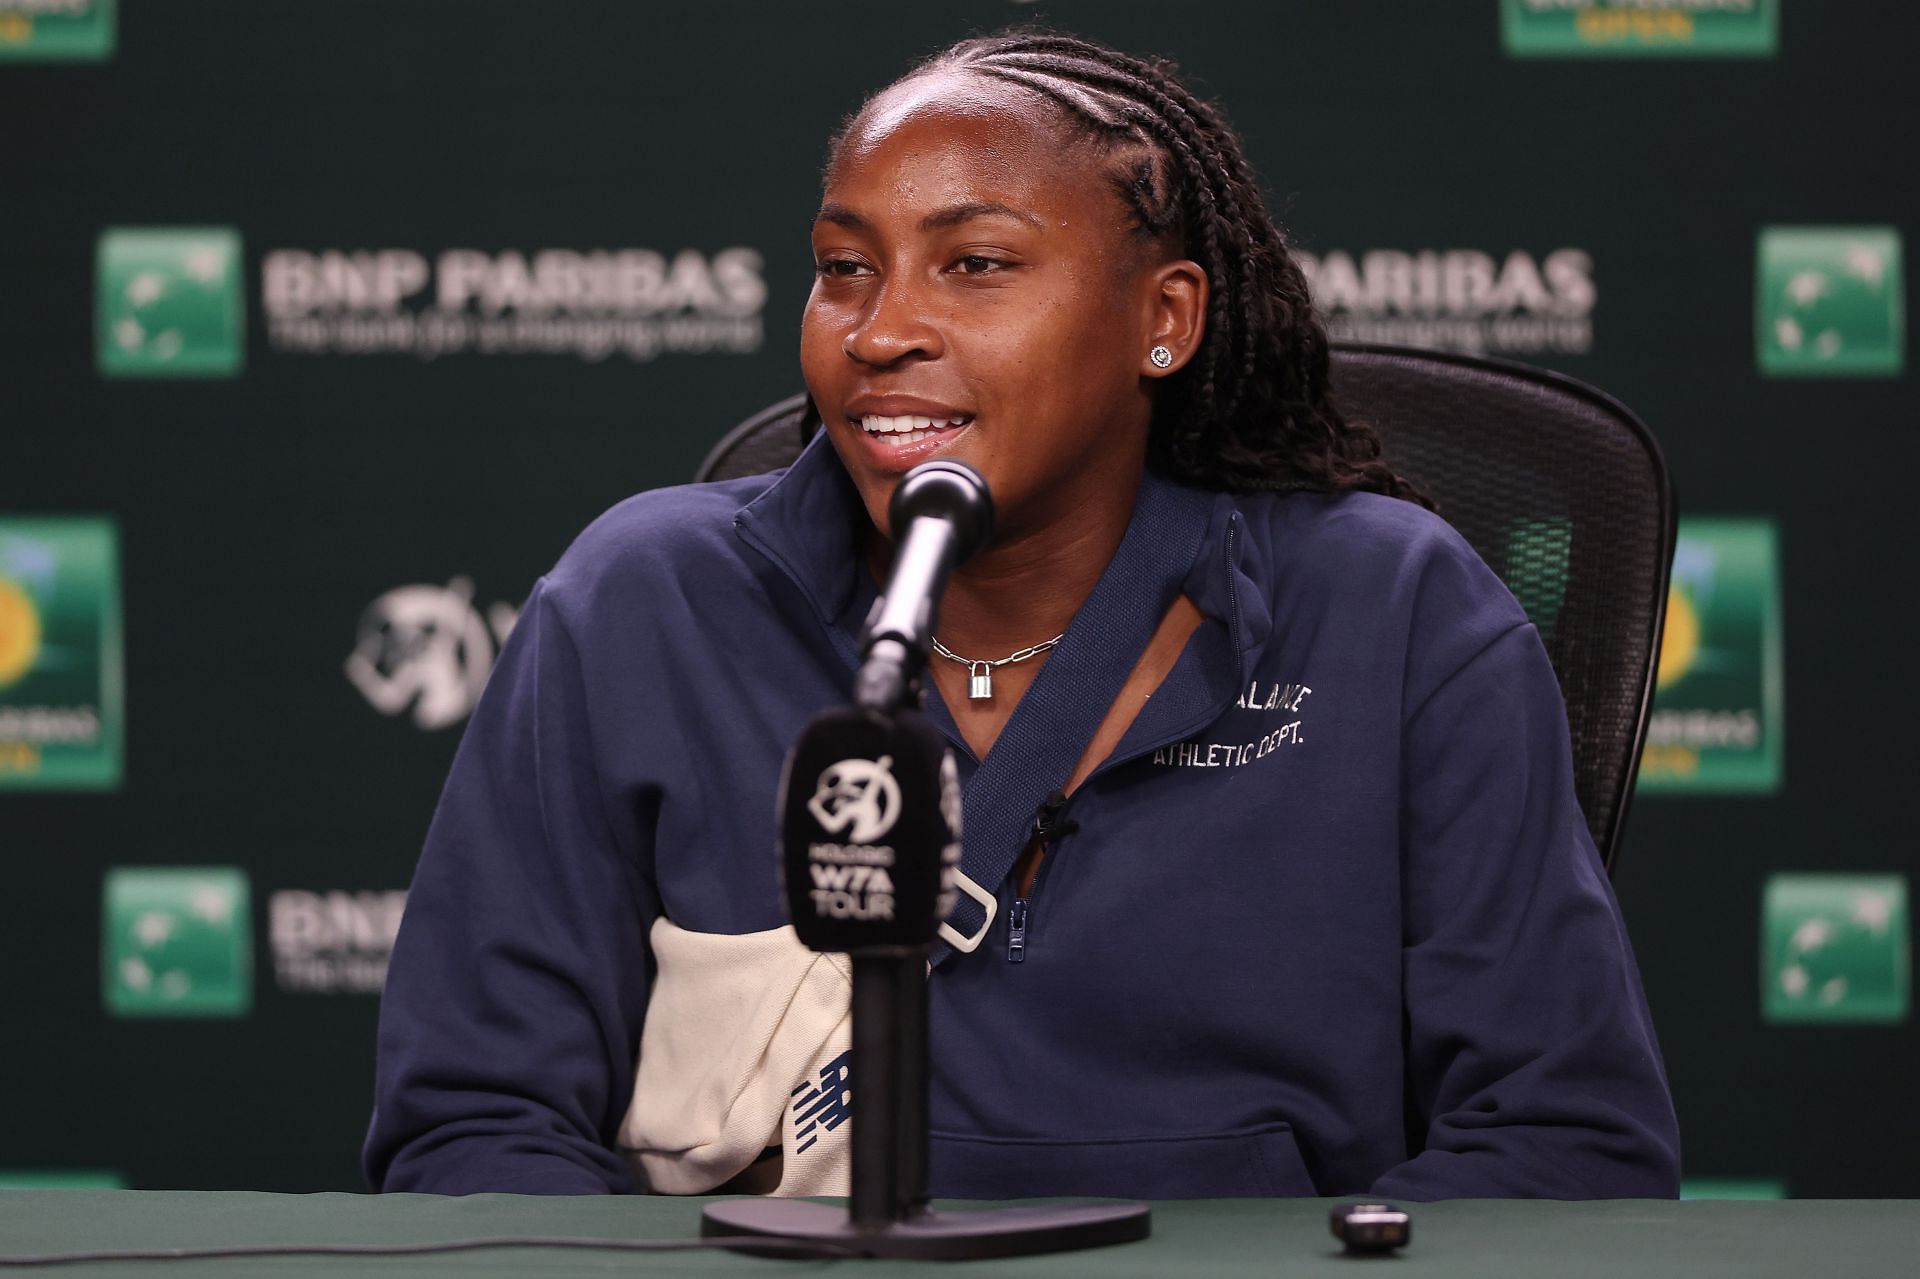 Coco Gauff is through to the third round of the BNP Paribas Open.